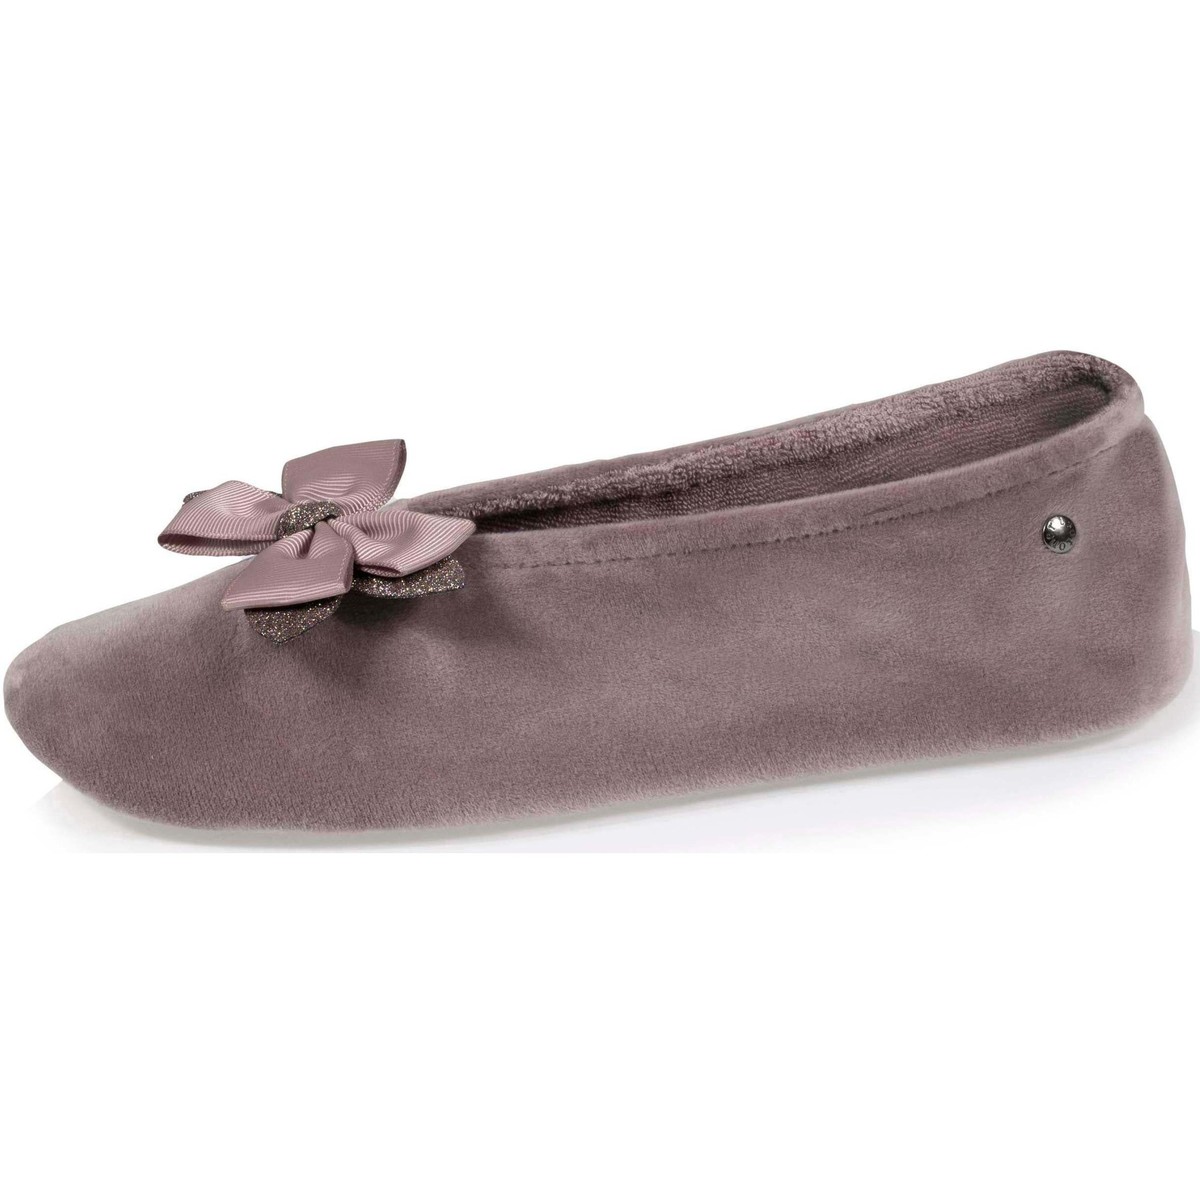 Chaussures Femme Chaussons Isotoner Chaussons Ballerines nœud gros-grain Marron